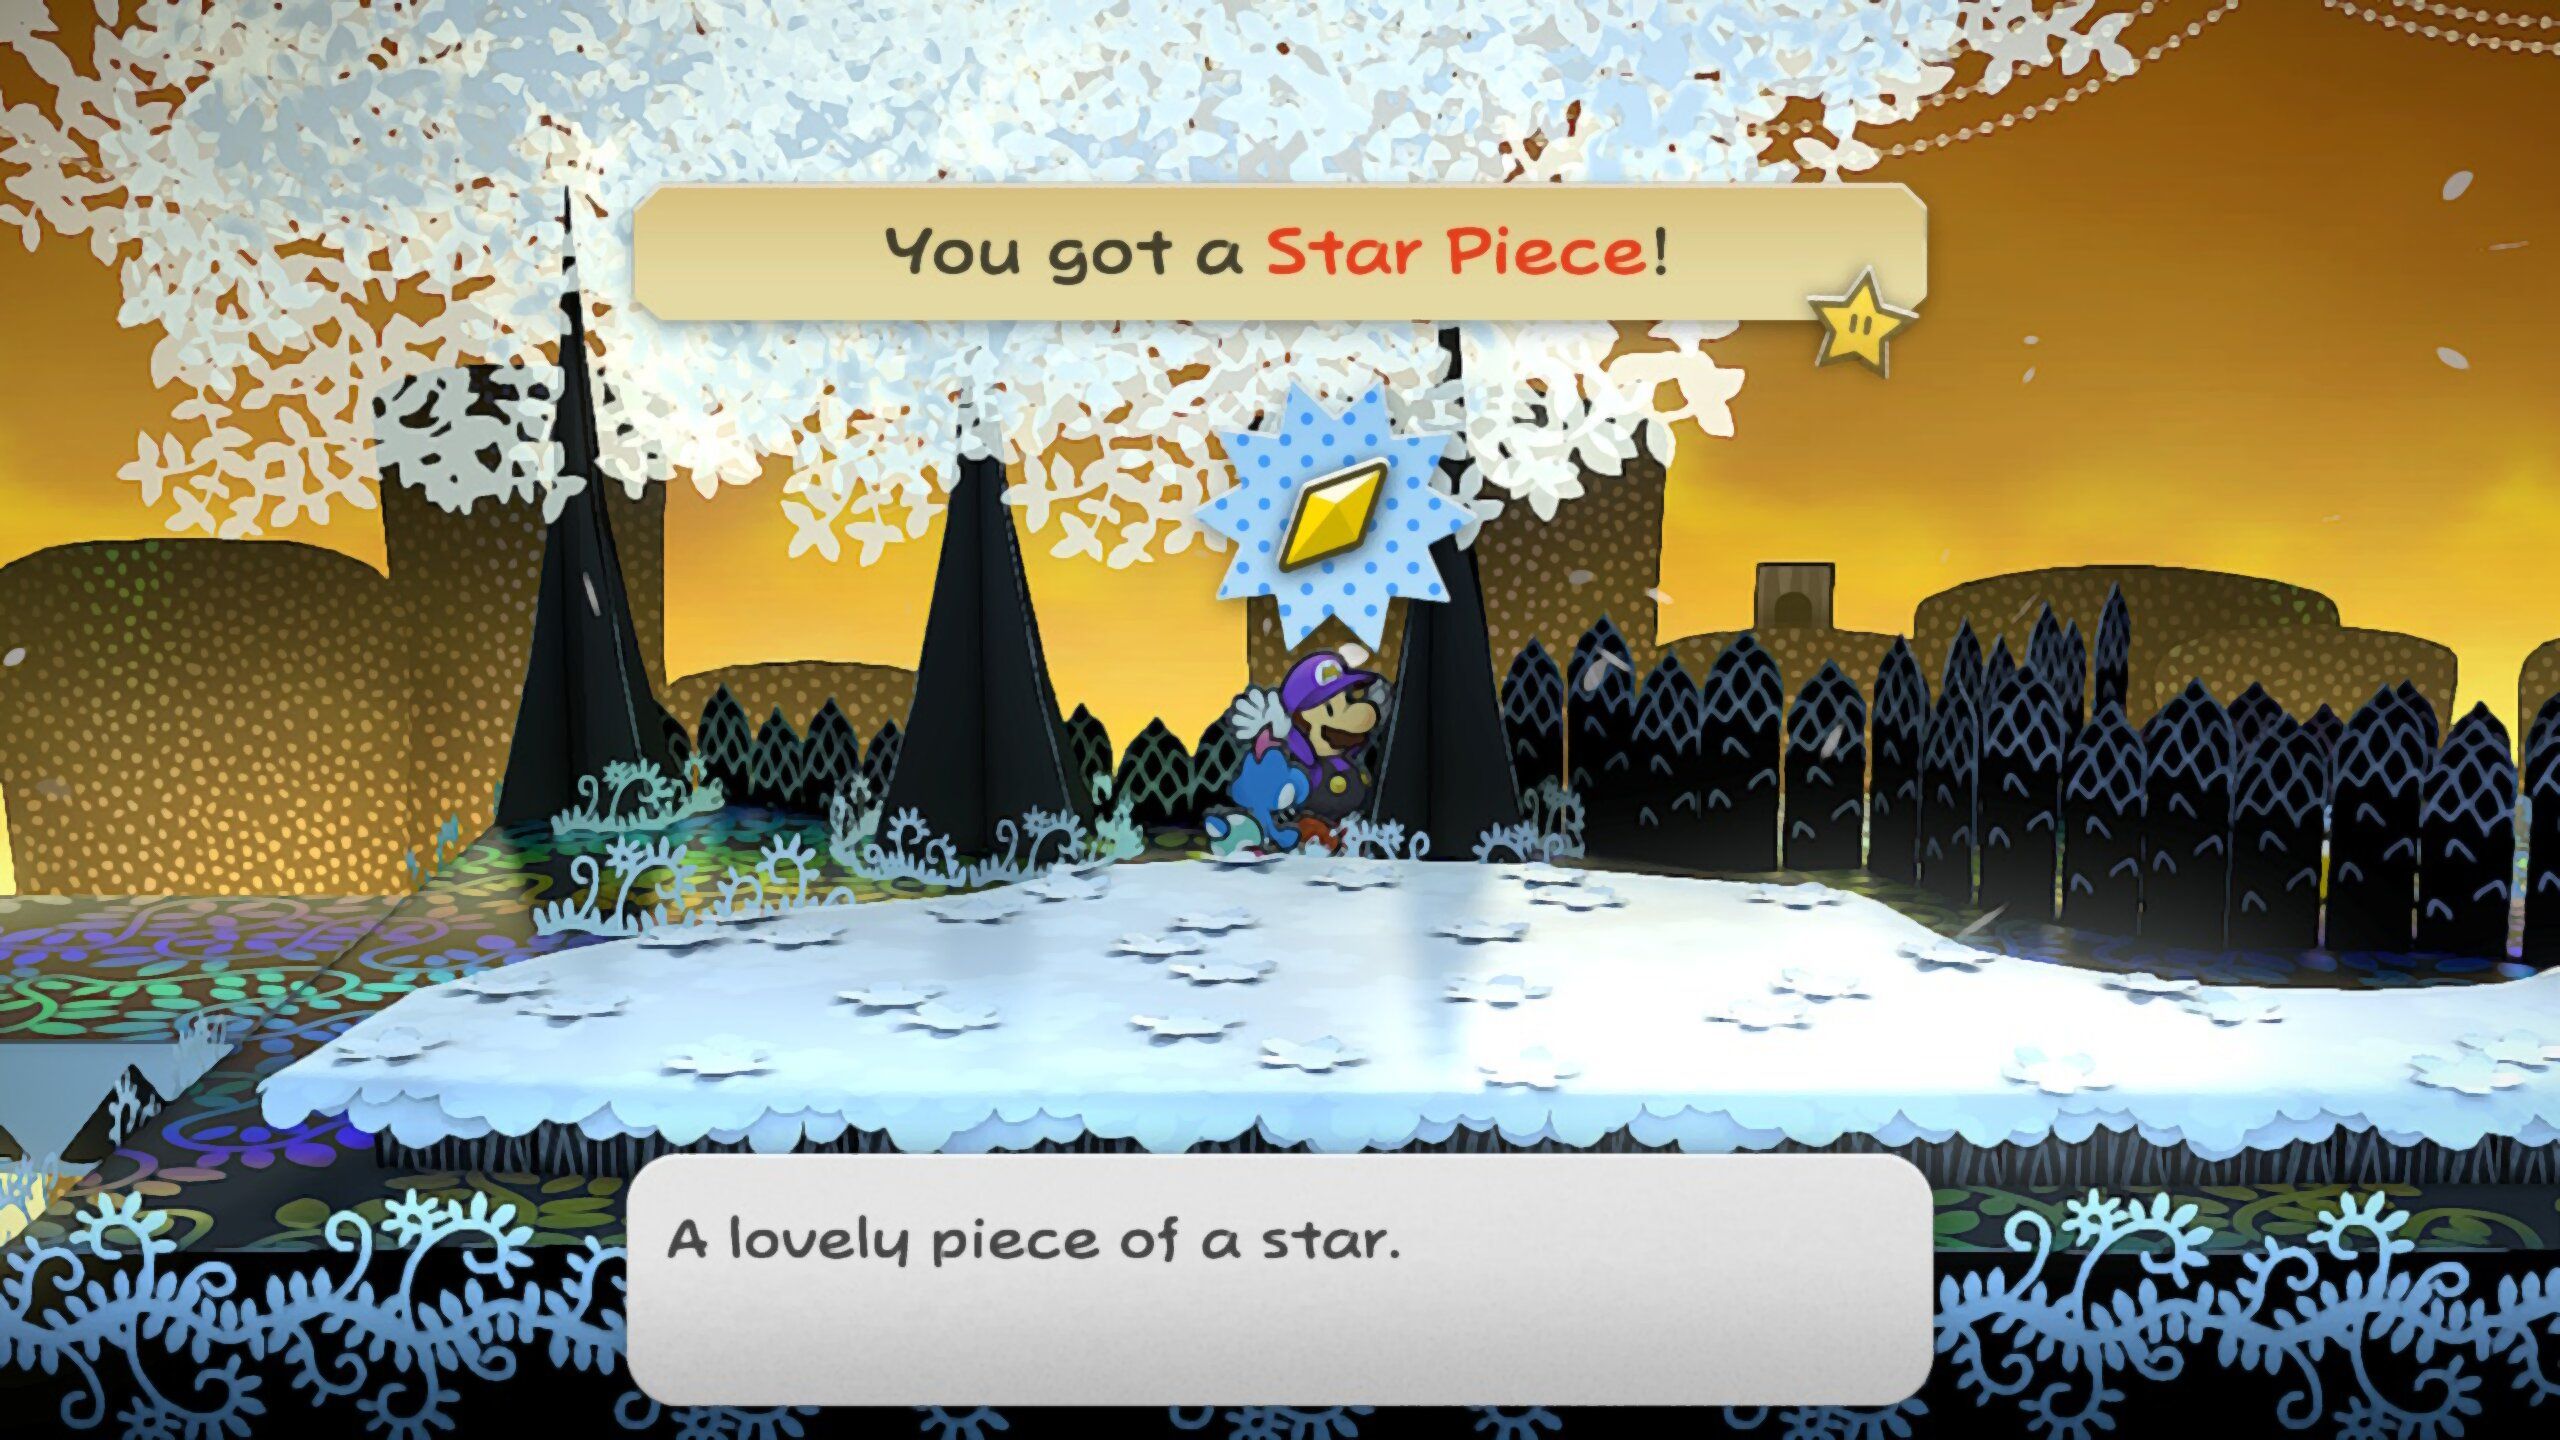 Image of a star piece near a tree by Flurrie's house in Paper Mario TTYD